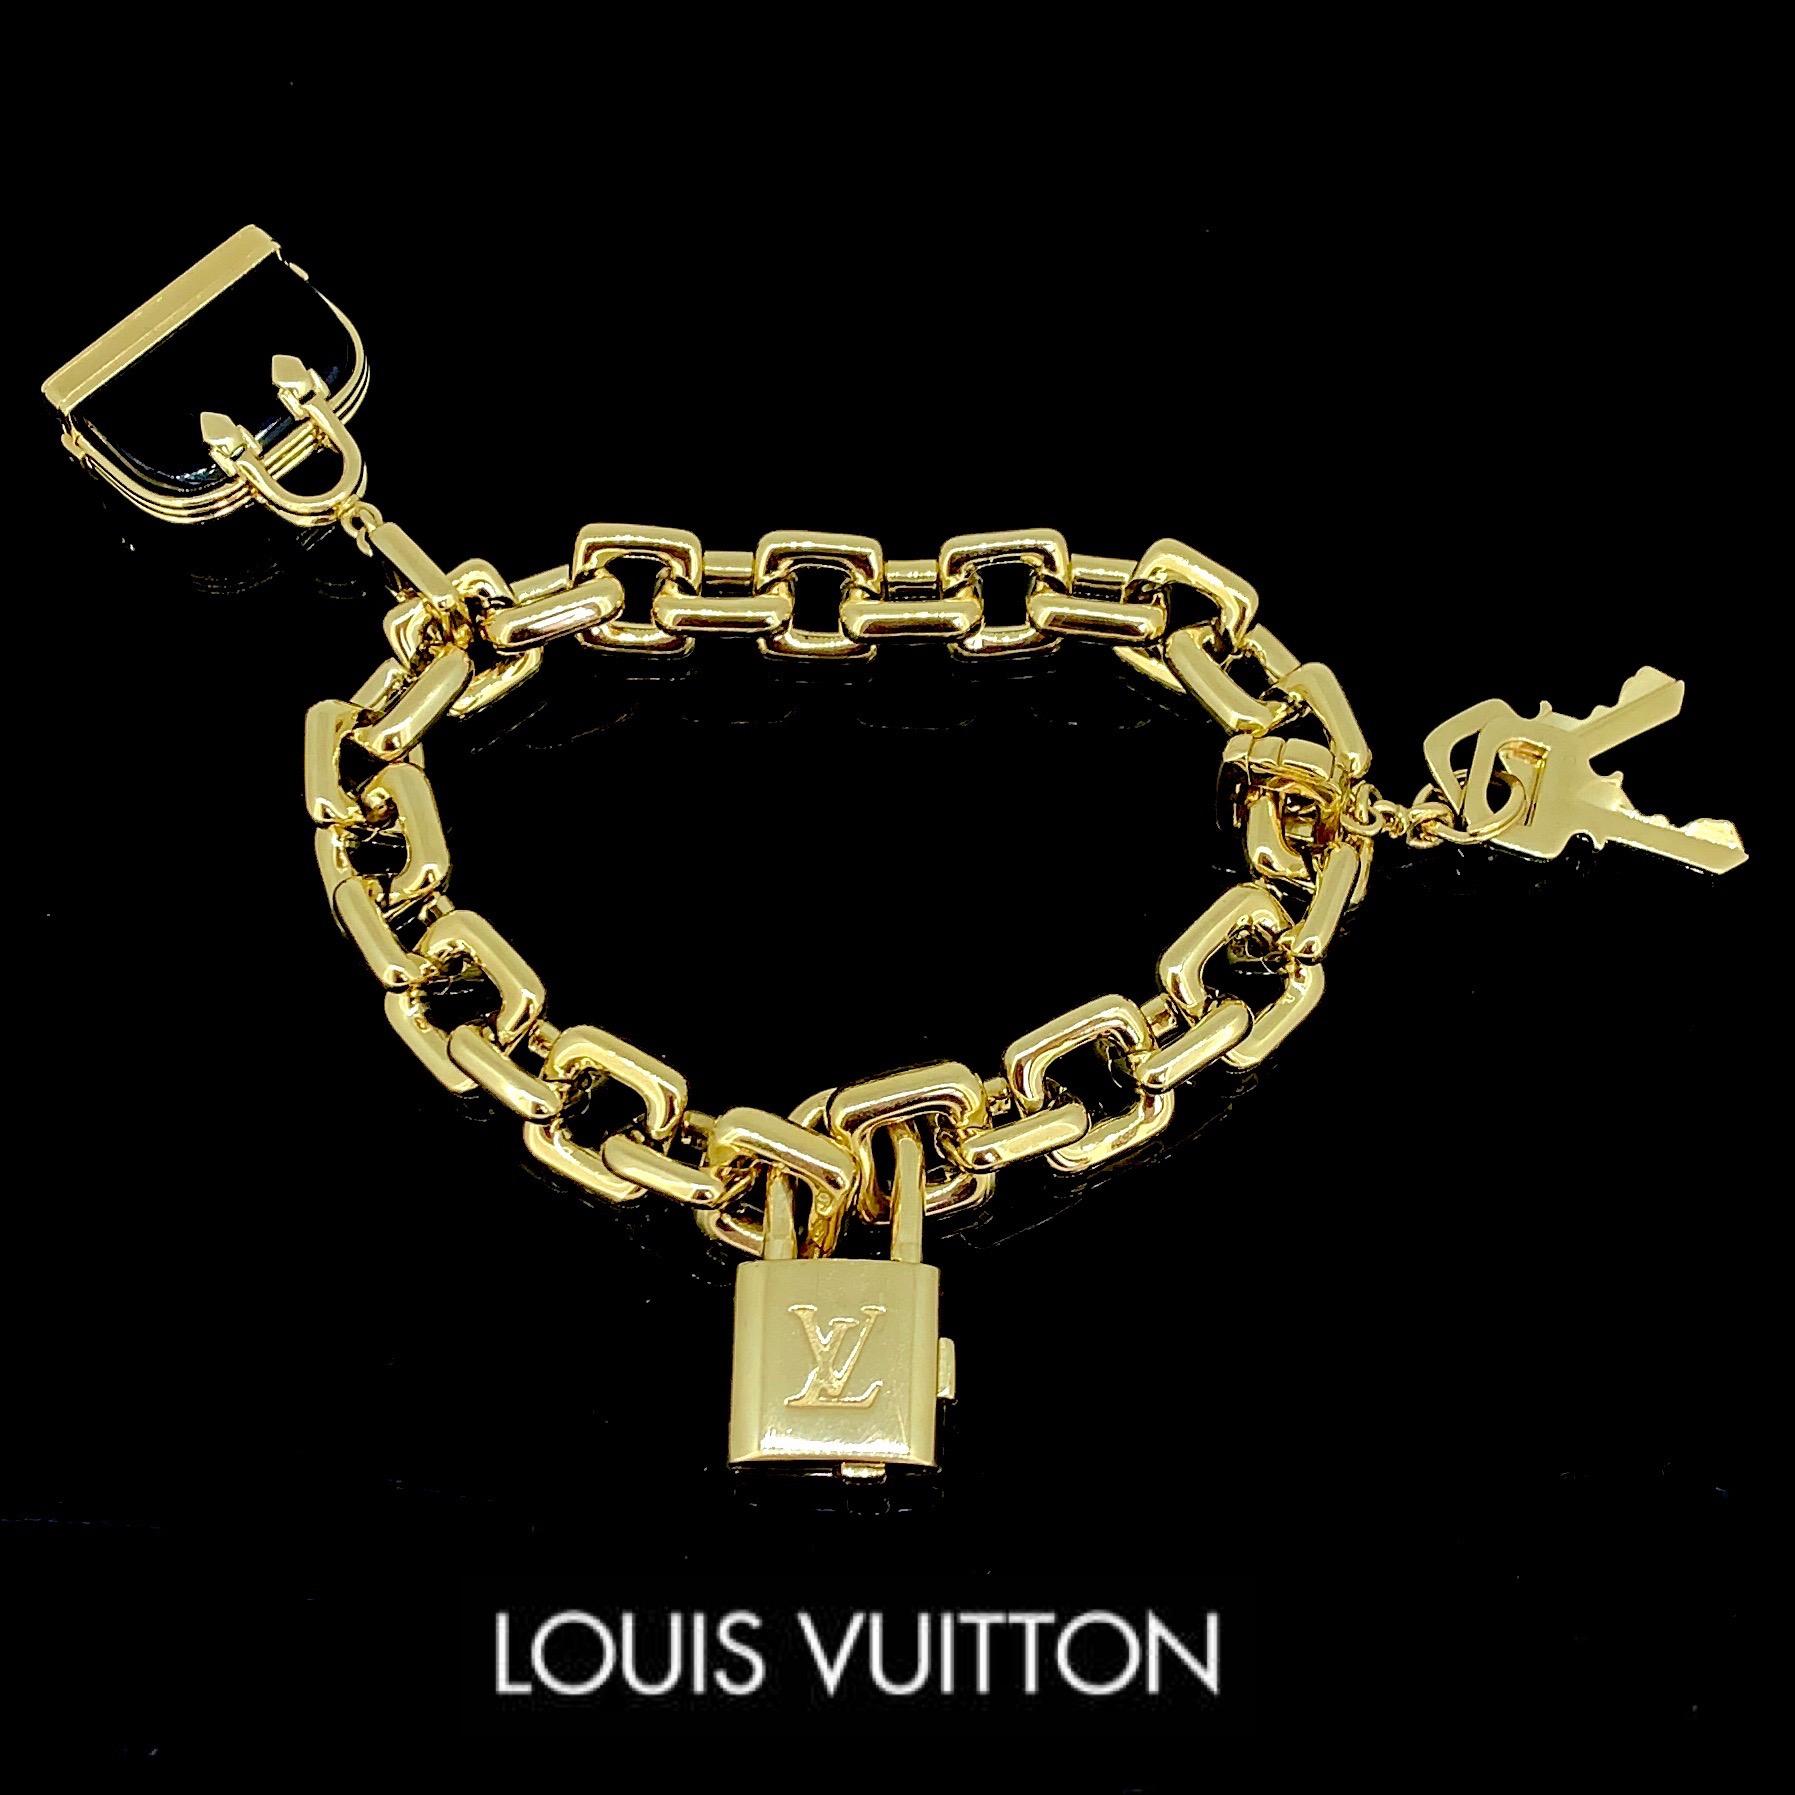 This link bracelet is made in 18kt solid yellow gold. It opens and closes via the padlock. The two other charms added are a pair of keys and the iconic Speedy bag. They are both detachable. The bracelet is 7.5in long and can be adjustable. Each